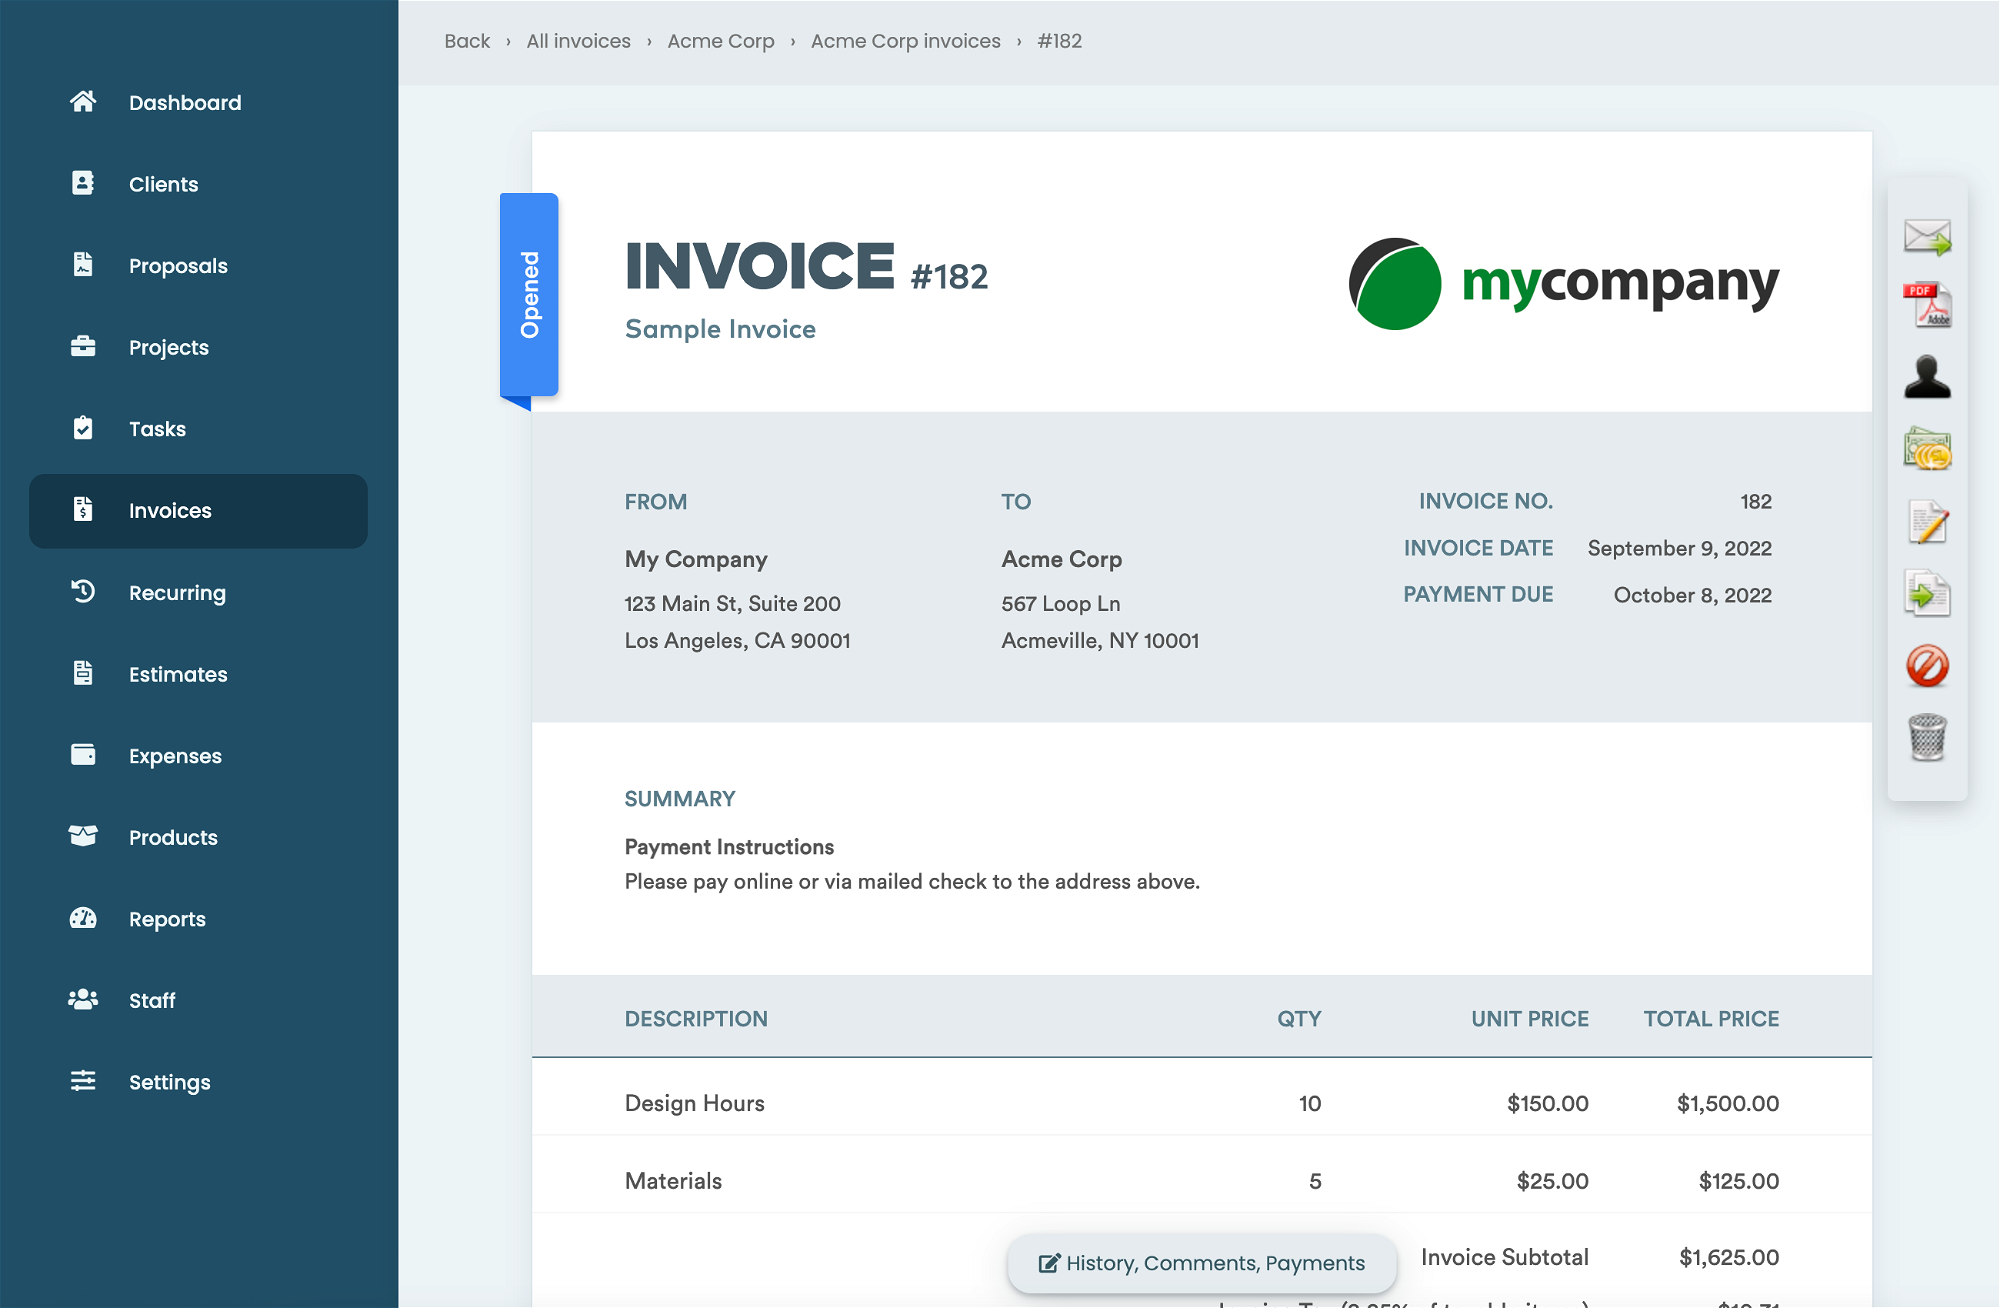 Branded invoices